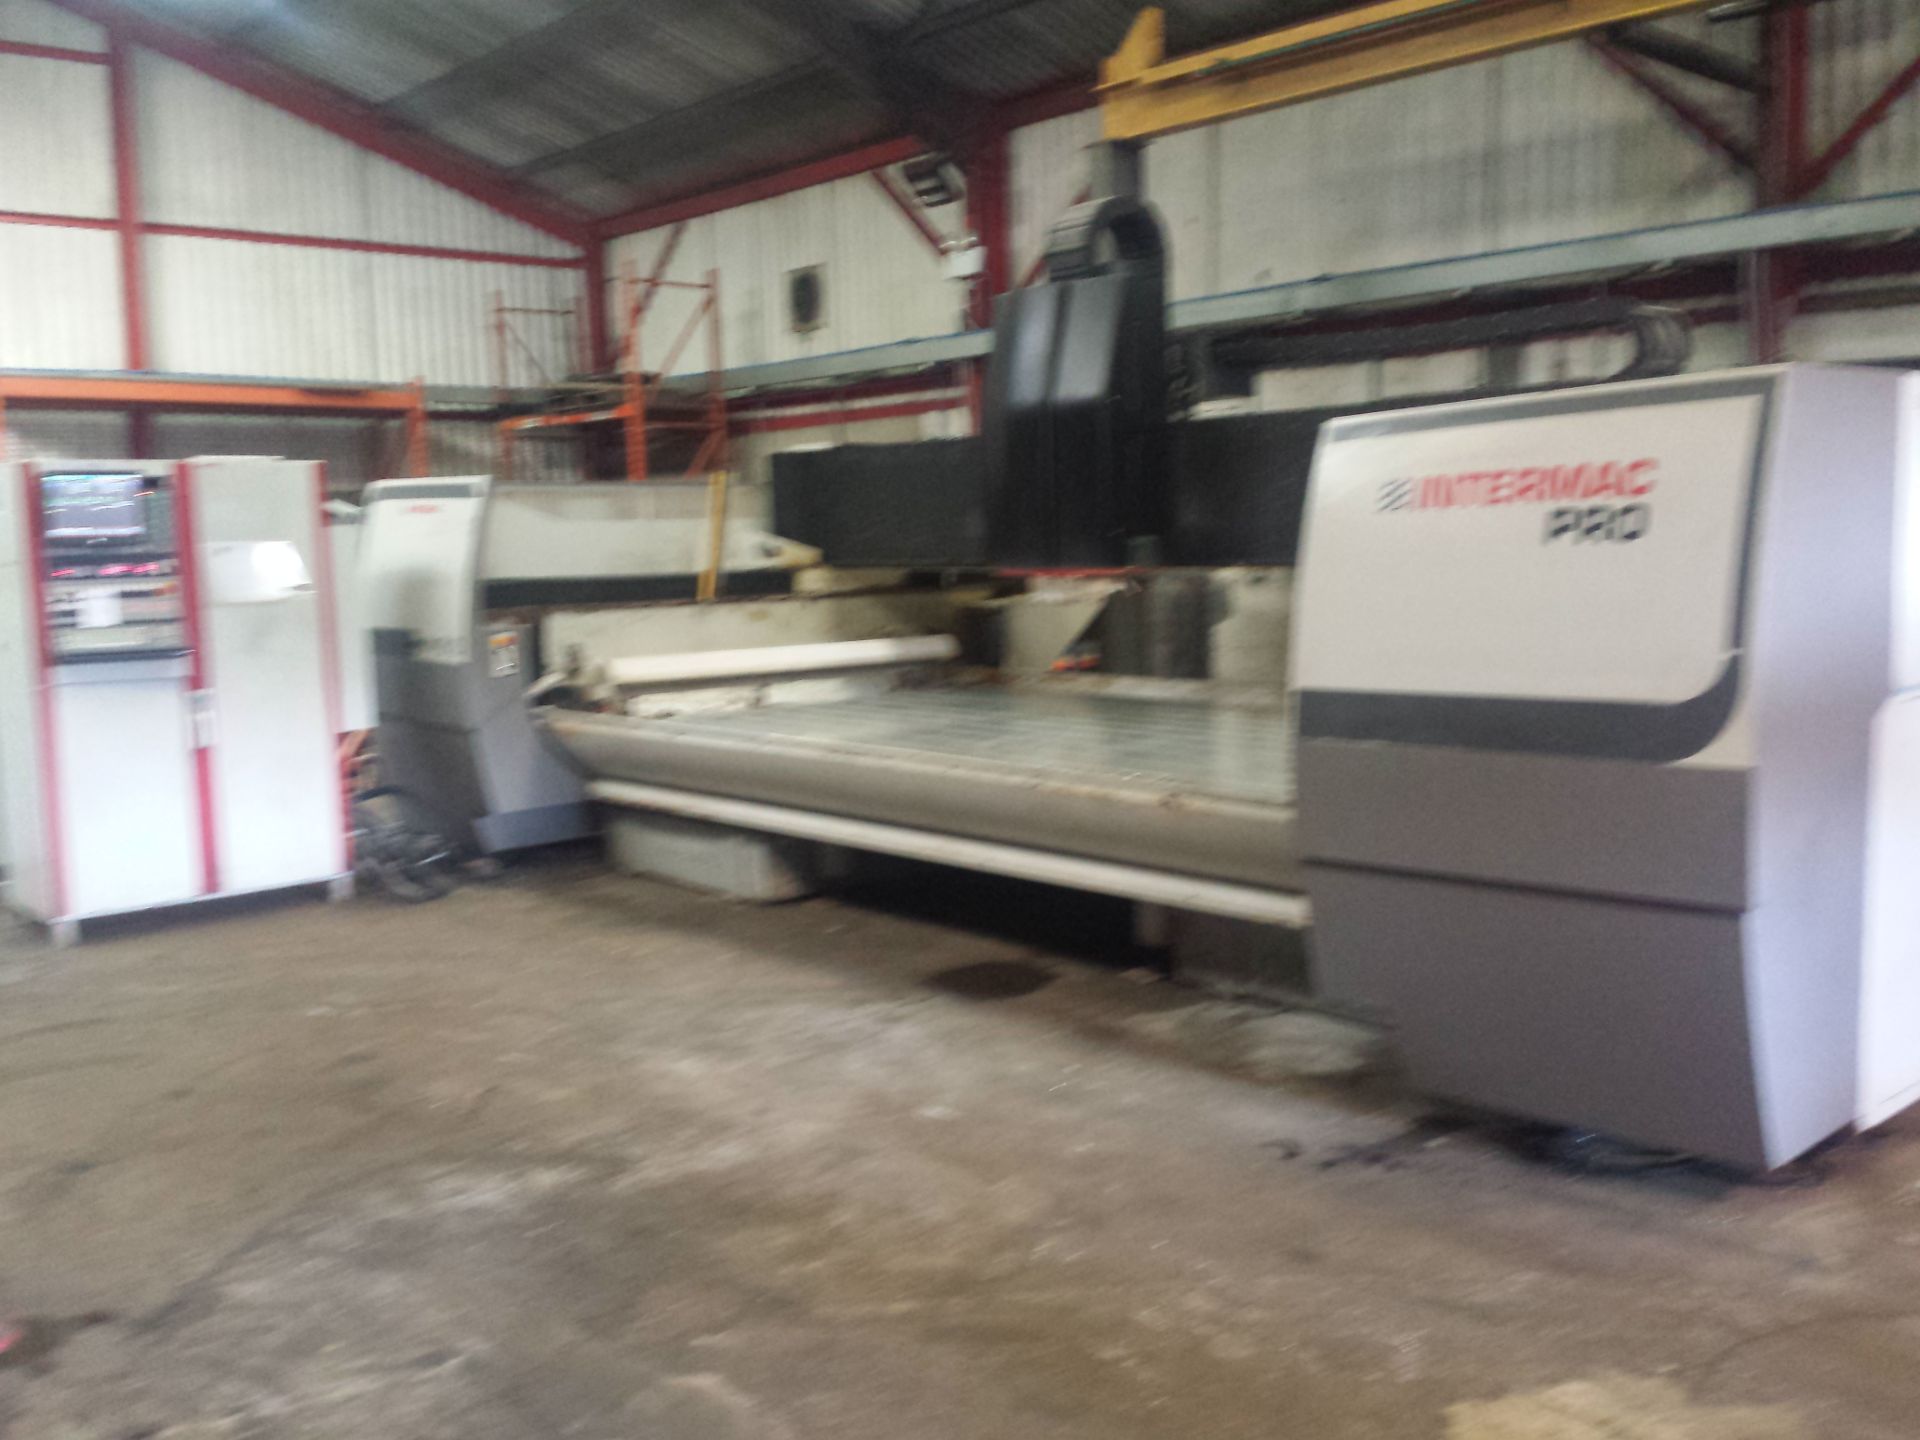 Intermac Pro C, CNC Machining Centre 4000×2000 Bed Size with S10 Numerical Control Unit, Serial - Image 3 of 5